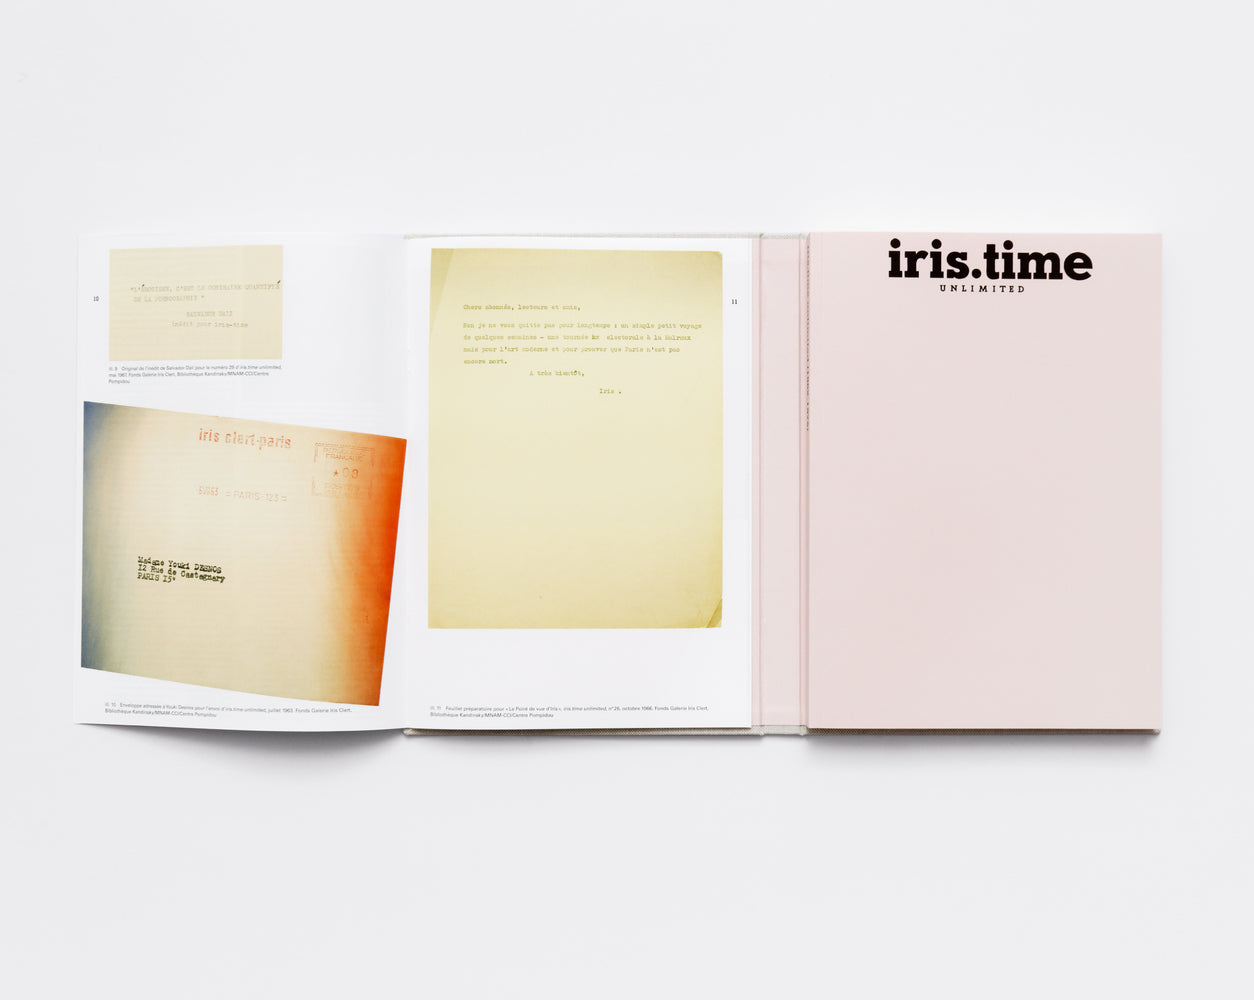 iris.time UNLIMITED (1962-1975)